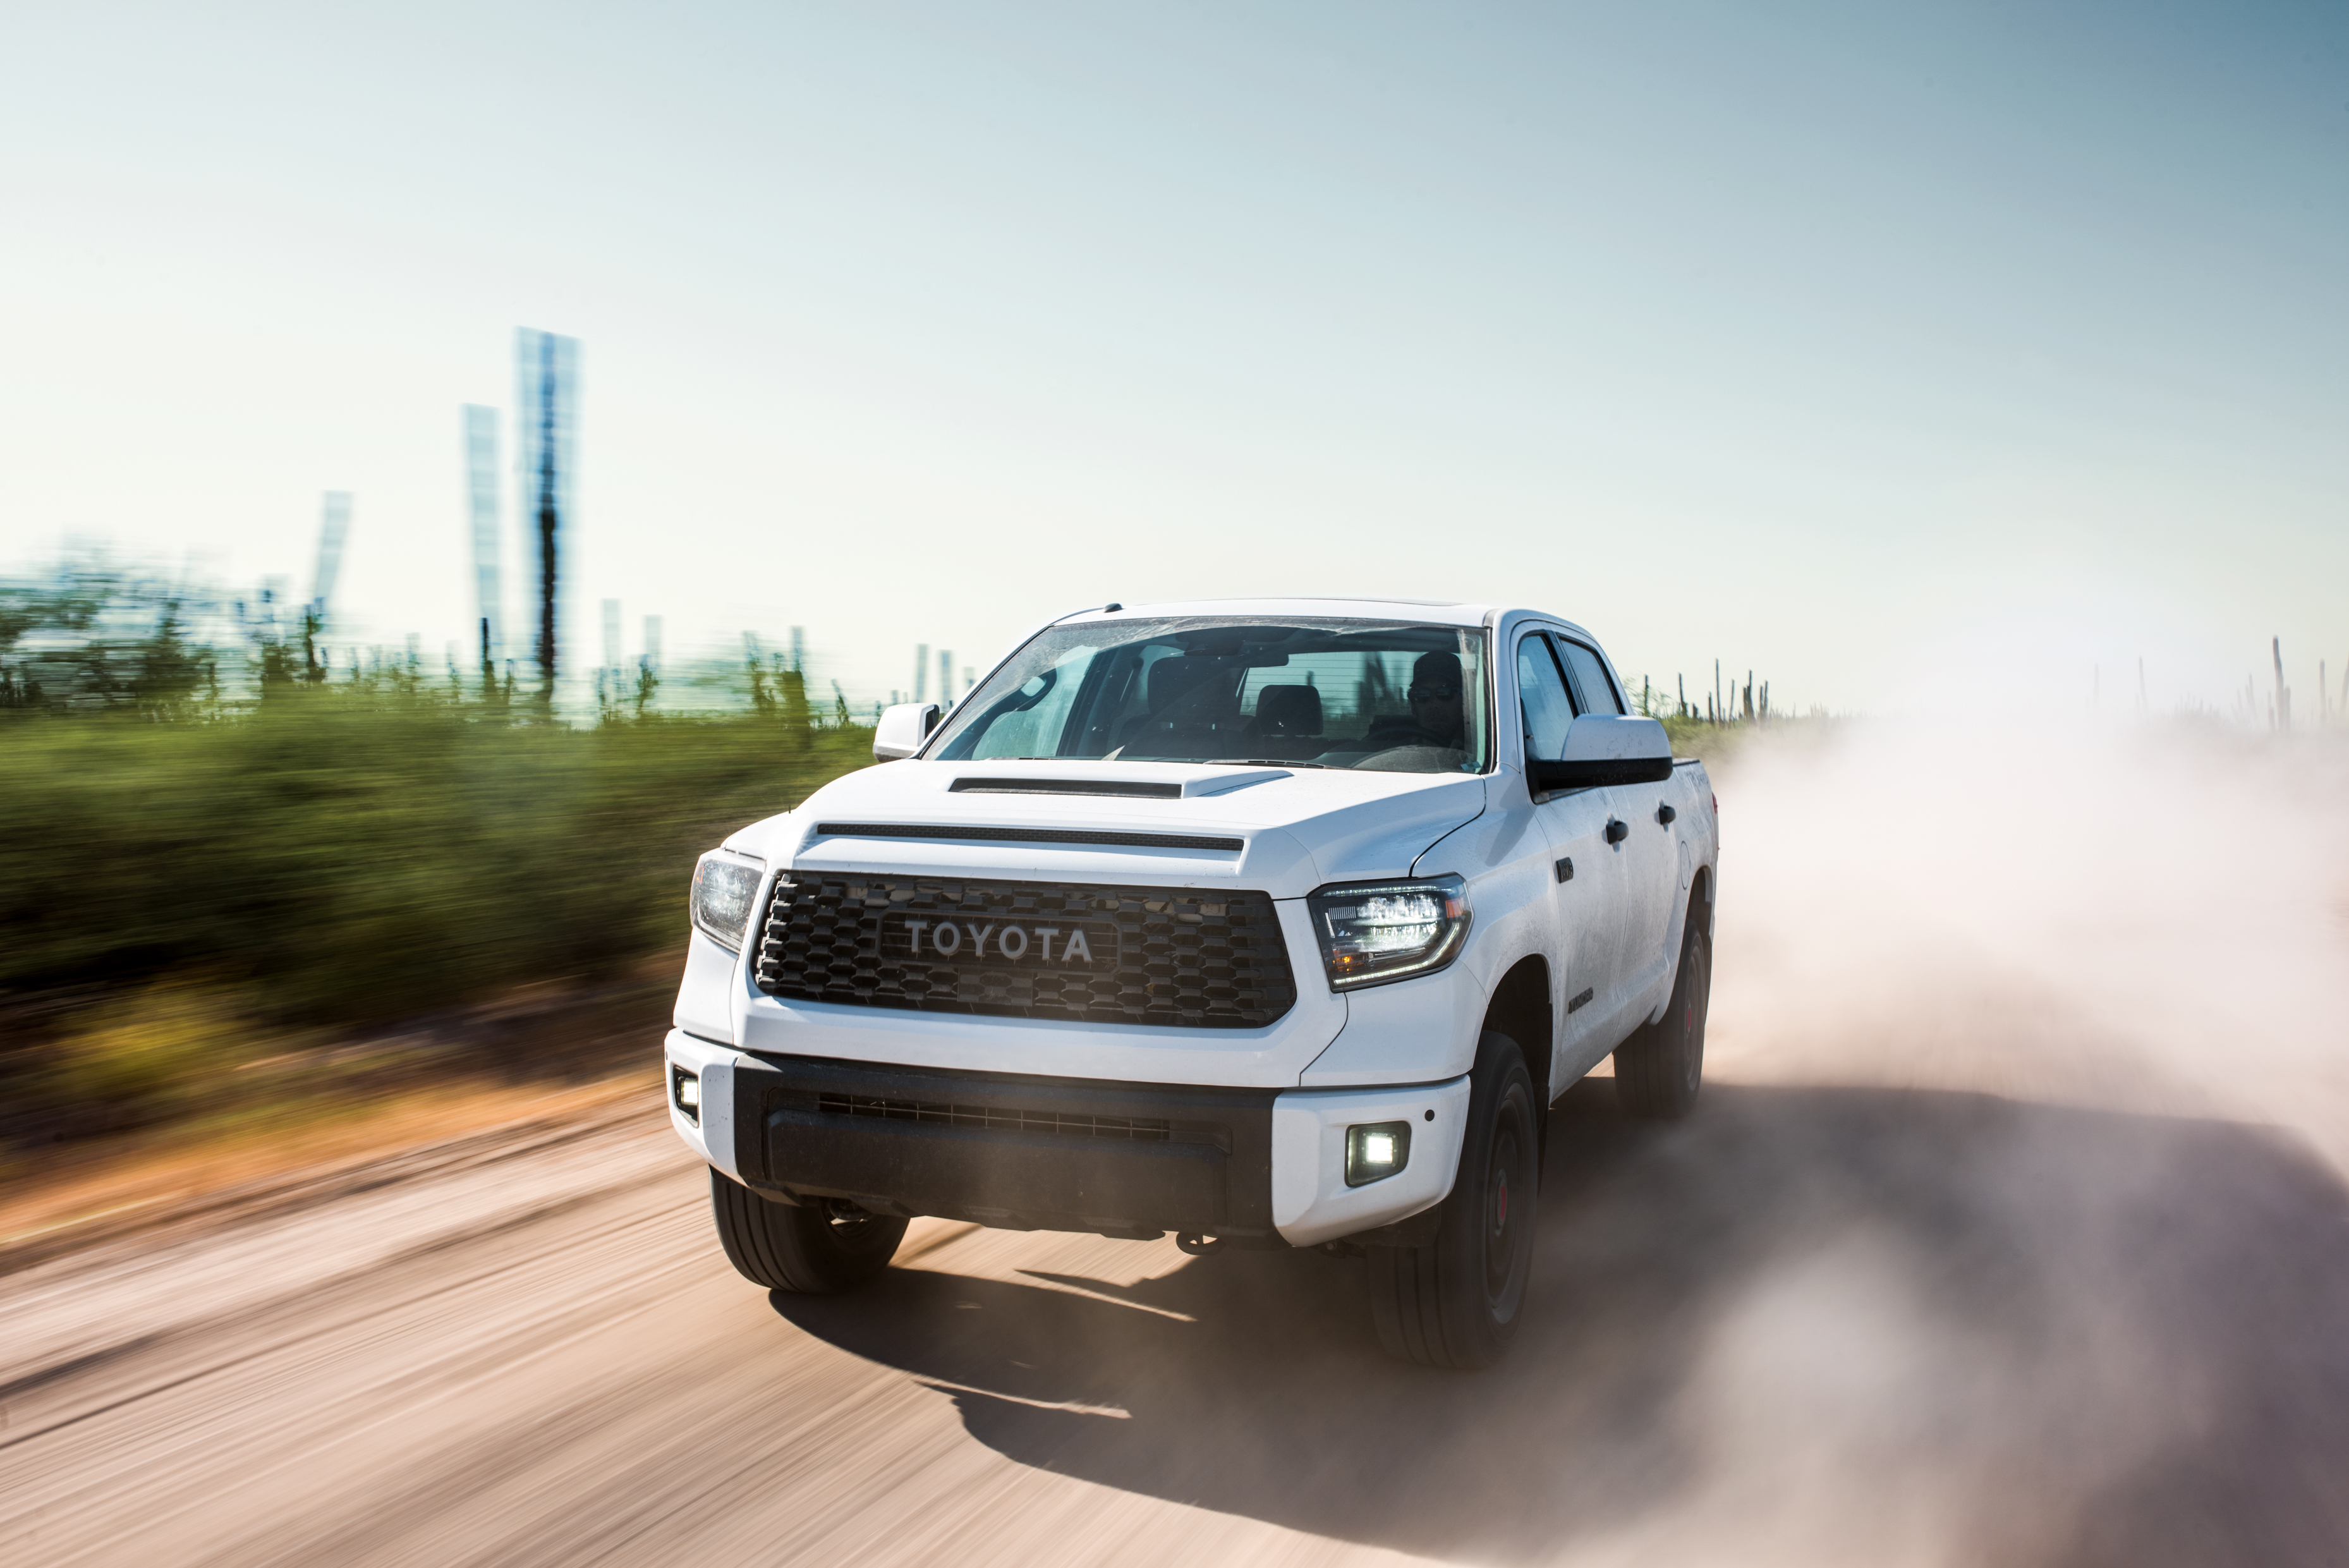 A white Toyota Tundra TRD Pro off-road pickup truck kicking up dirt